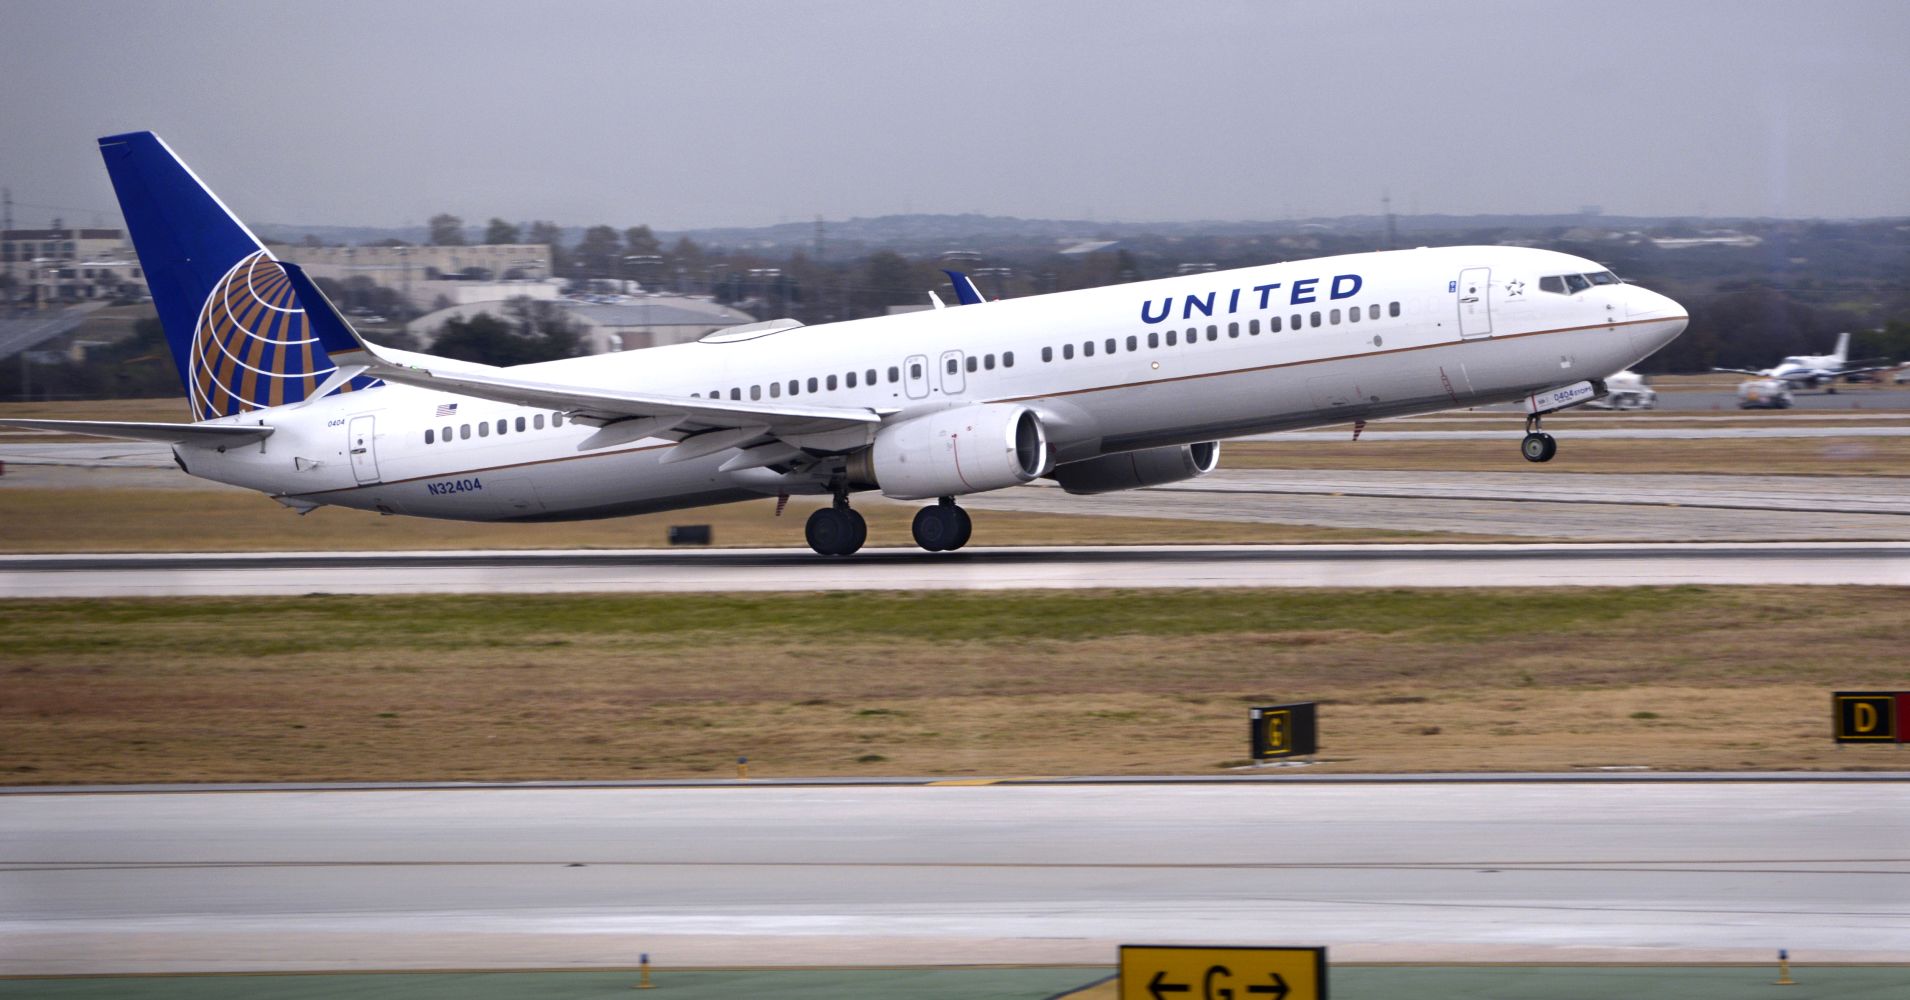 A United Airlines Boeing 737 passenger jet takes off at San Antonio International Airport in Texas.